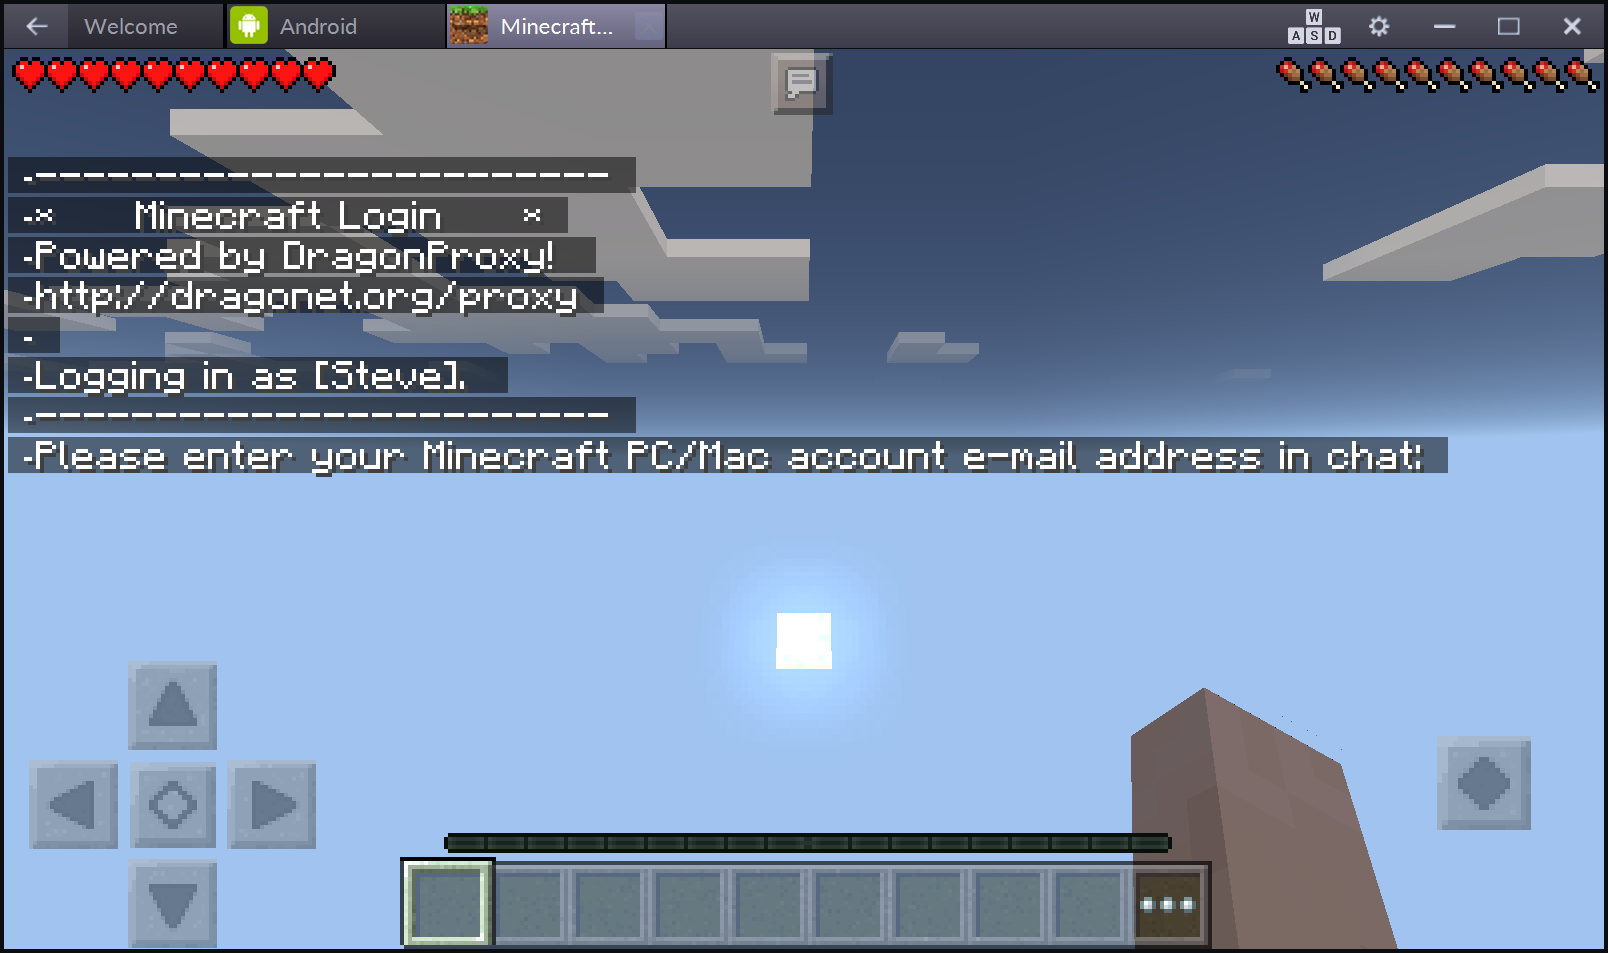 【Tool】Connect to any Minecraft PC server using MCPE with 